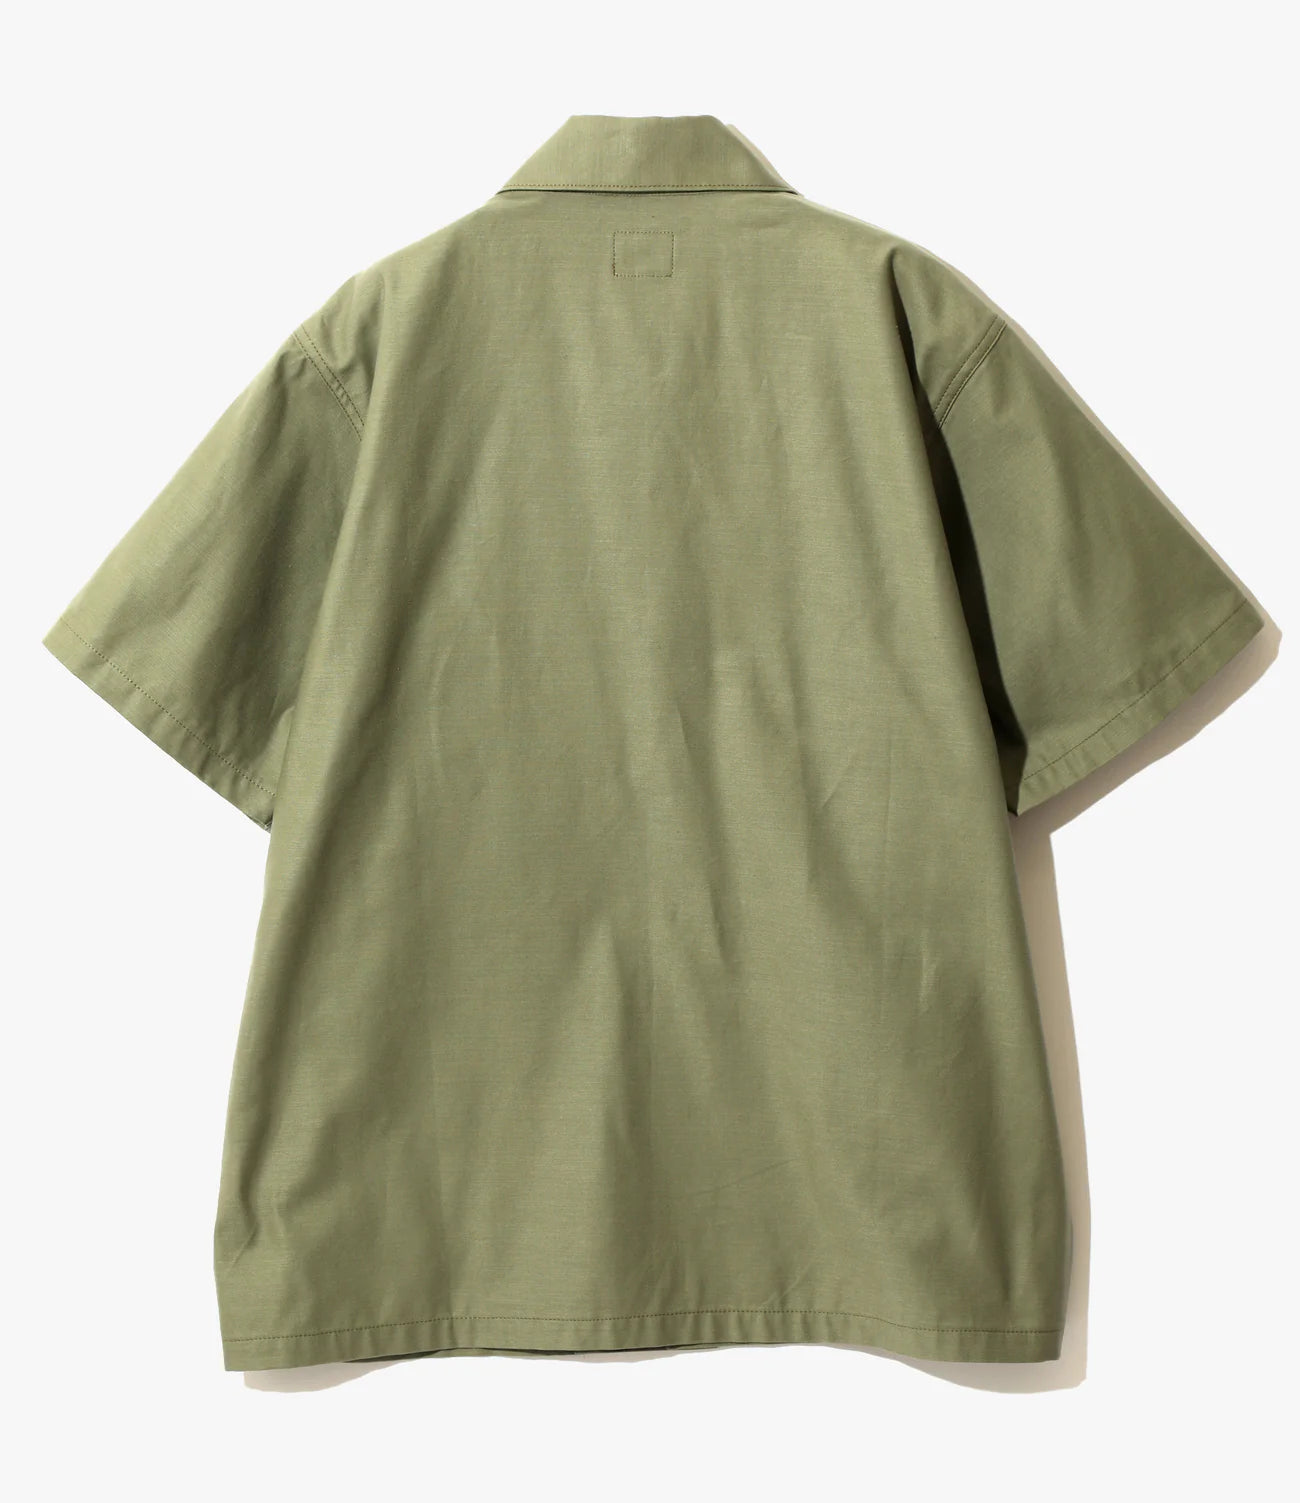 Needles S/S Fatigue Shirt - Back Sateen - Olive